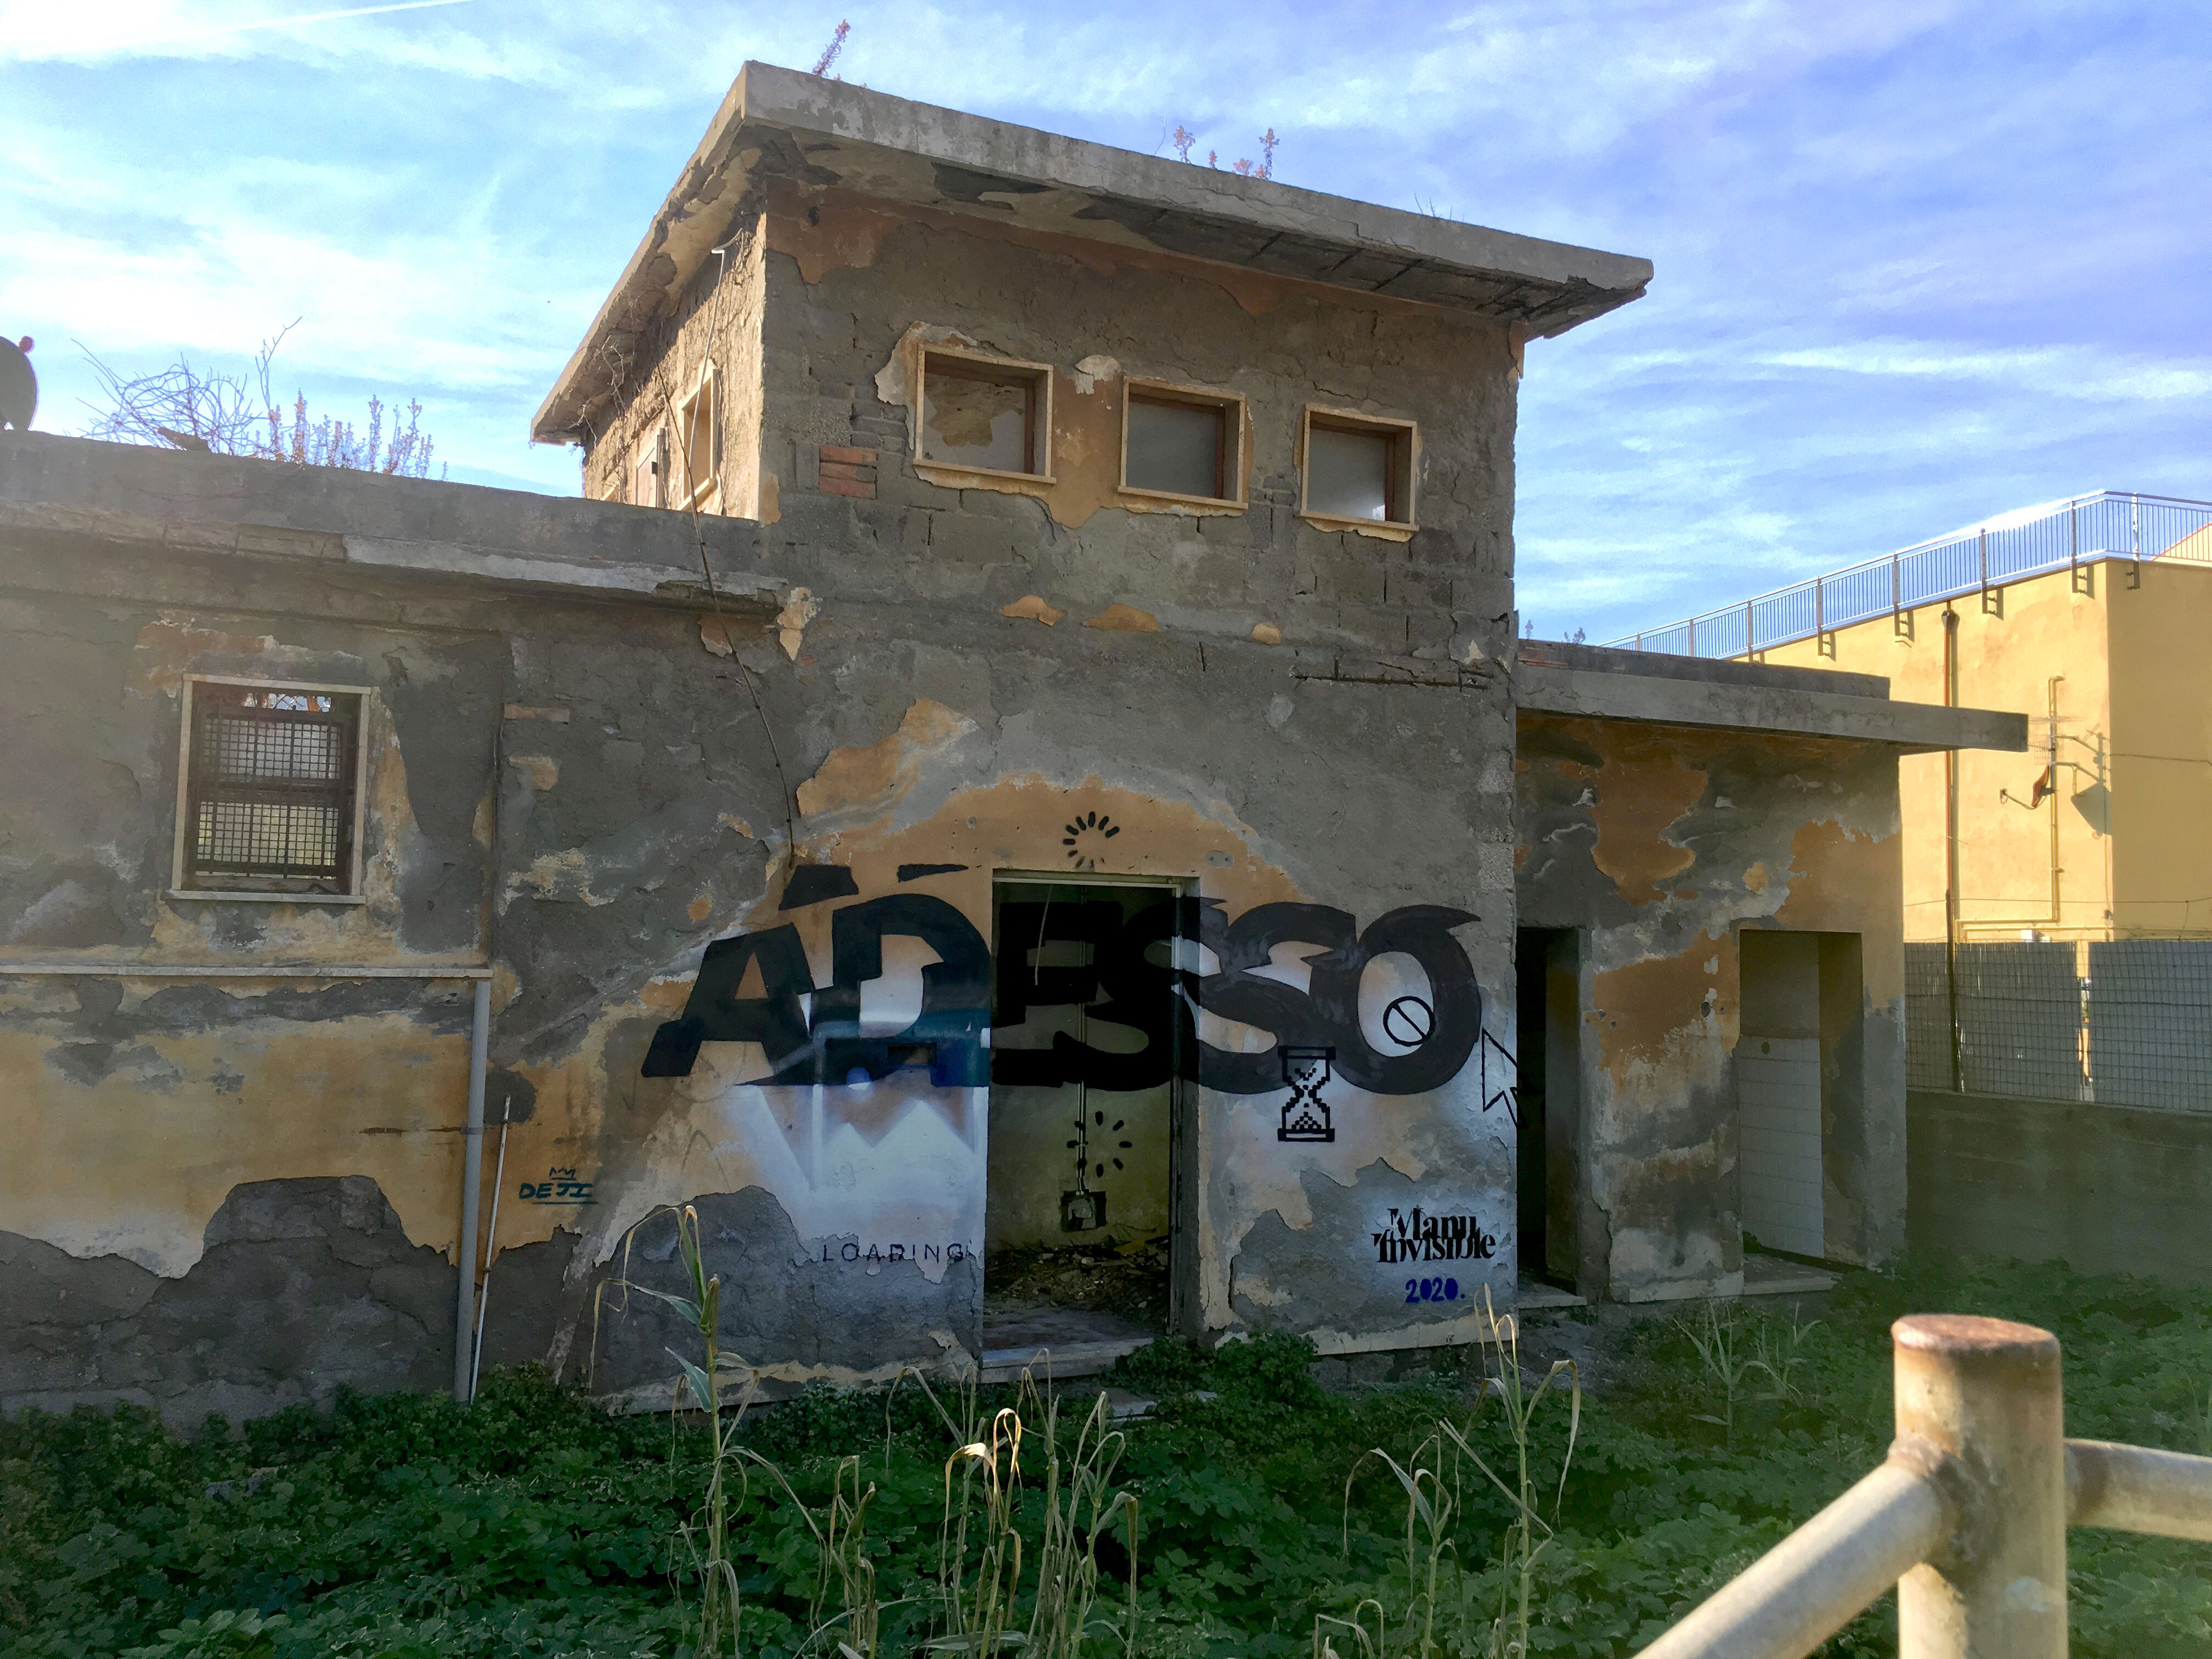 ''Adesso'' Spray on wall 2,0 x 4,0 m (anamorphism) Giglio's Island (Grosseto) 2020